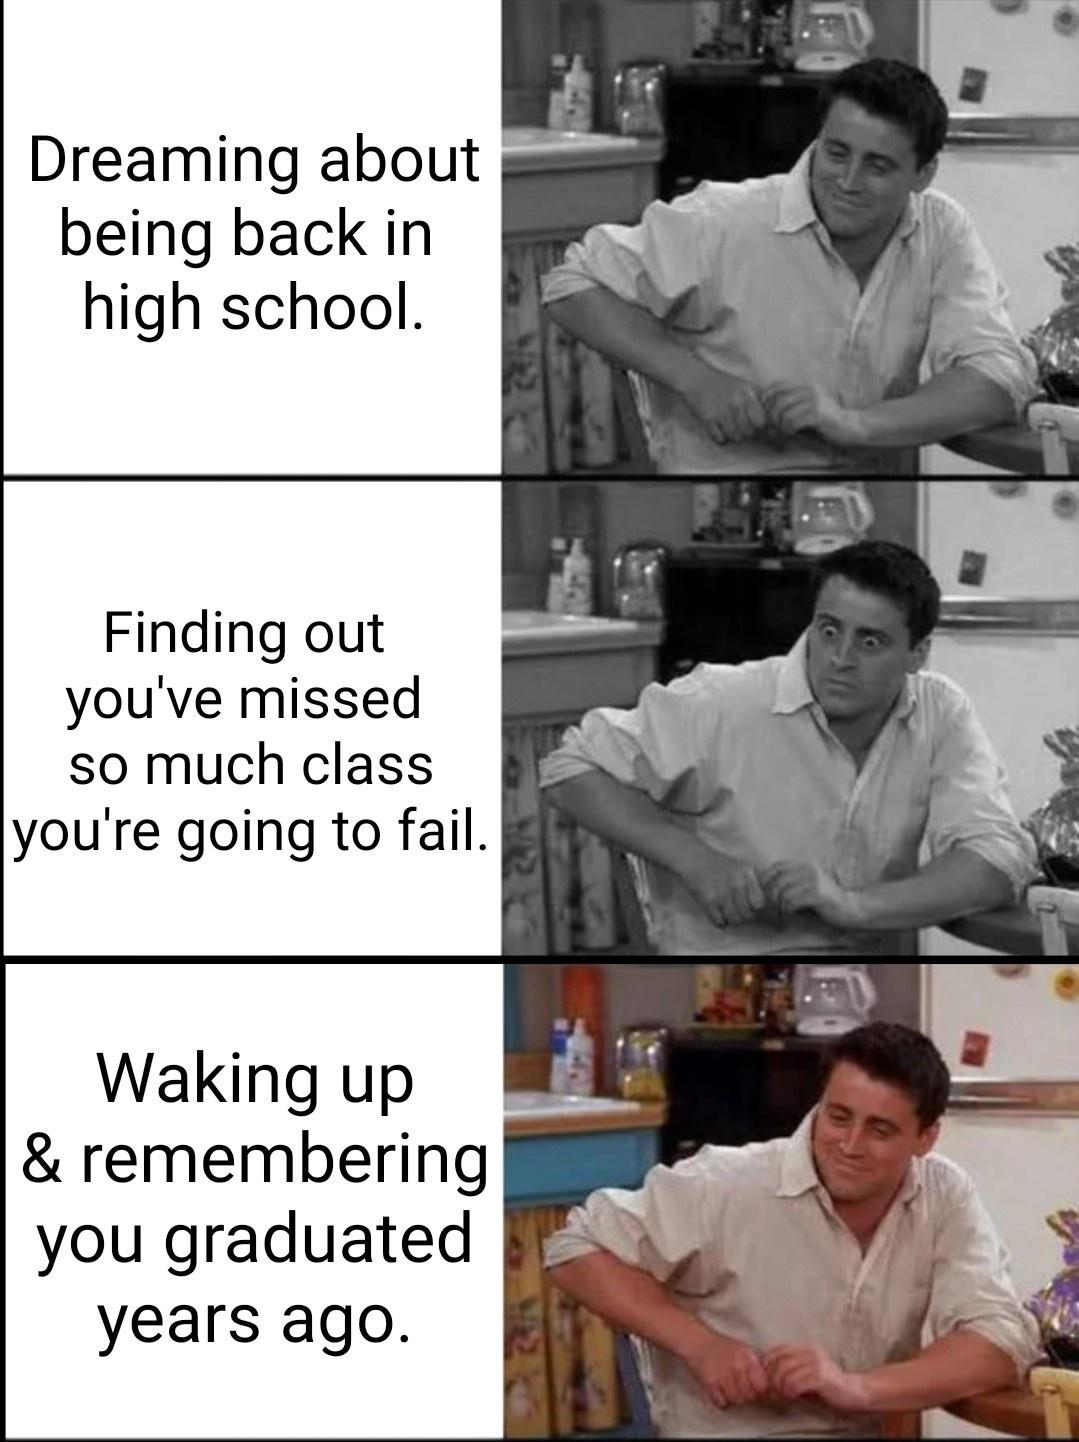 2020 tutorial complete meme - Dreaming about being back in high school. Finding out you've missed so much class you're going to fail. Waking up & remembering you graduated years ago.